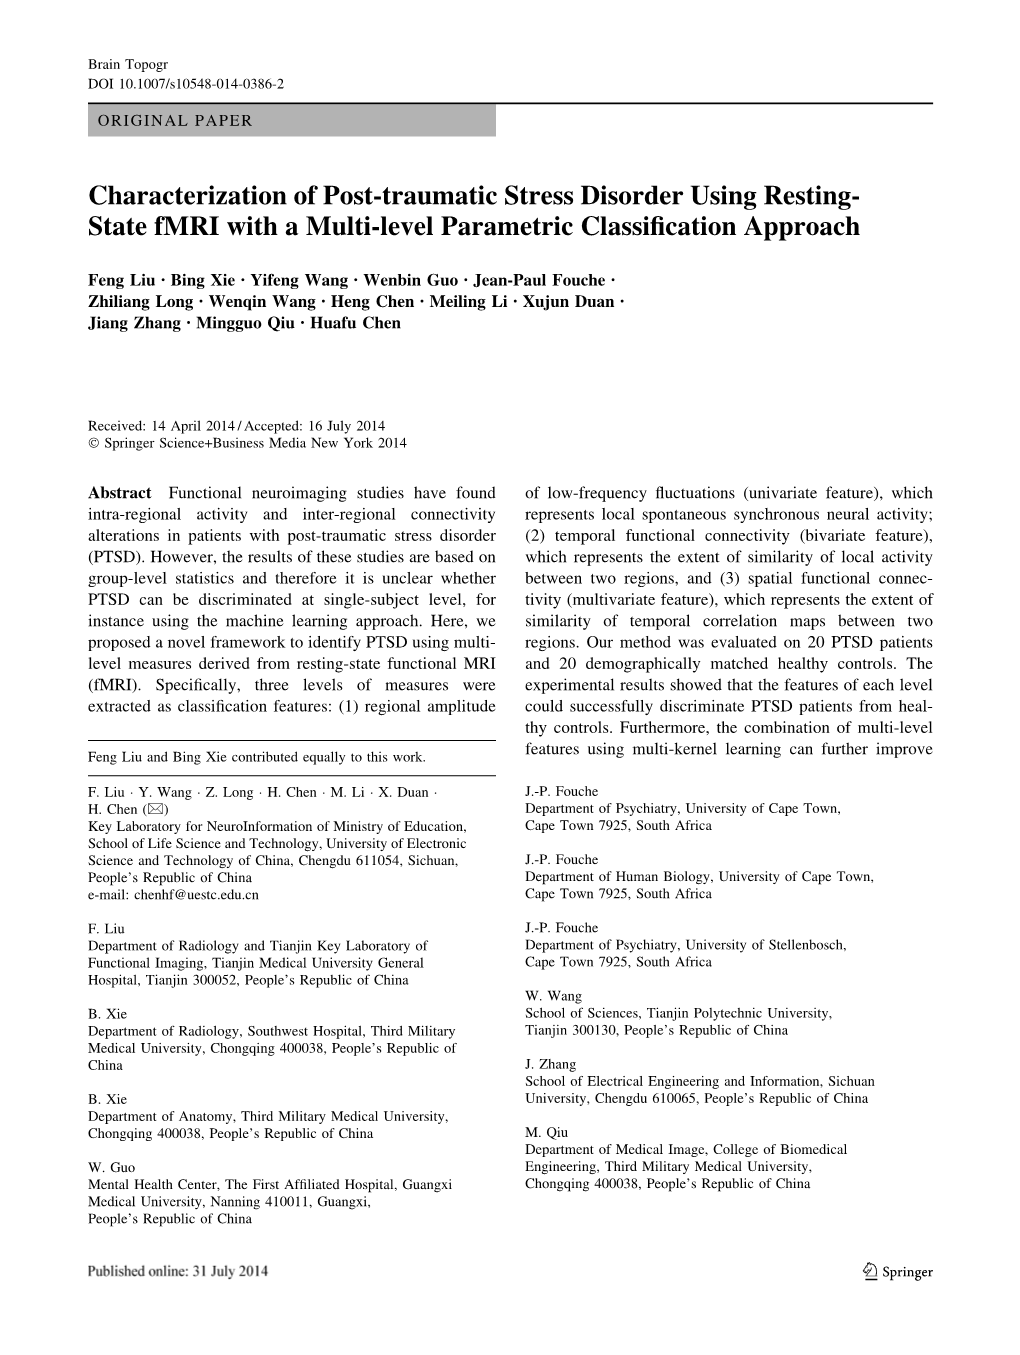 Characterization of Post-Traumatic Stress Disorder Using Resting- State Fmri with a Multi-Level Parametric Classiﬁcation Approach